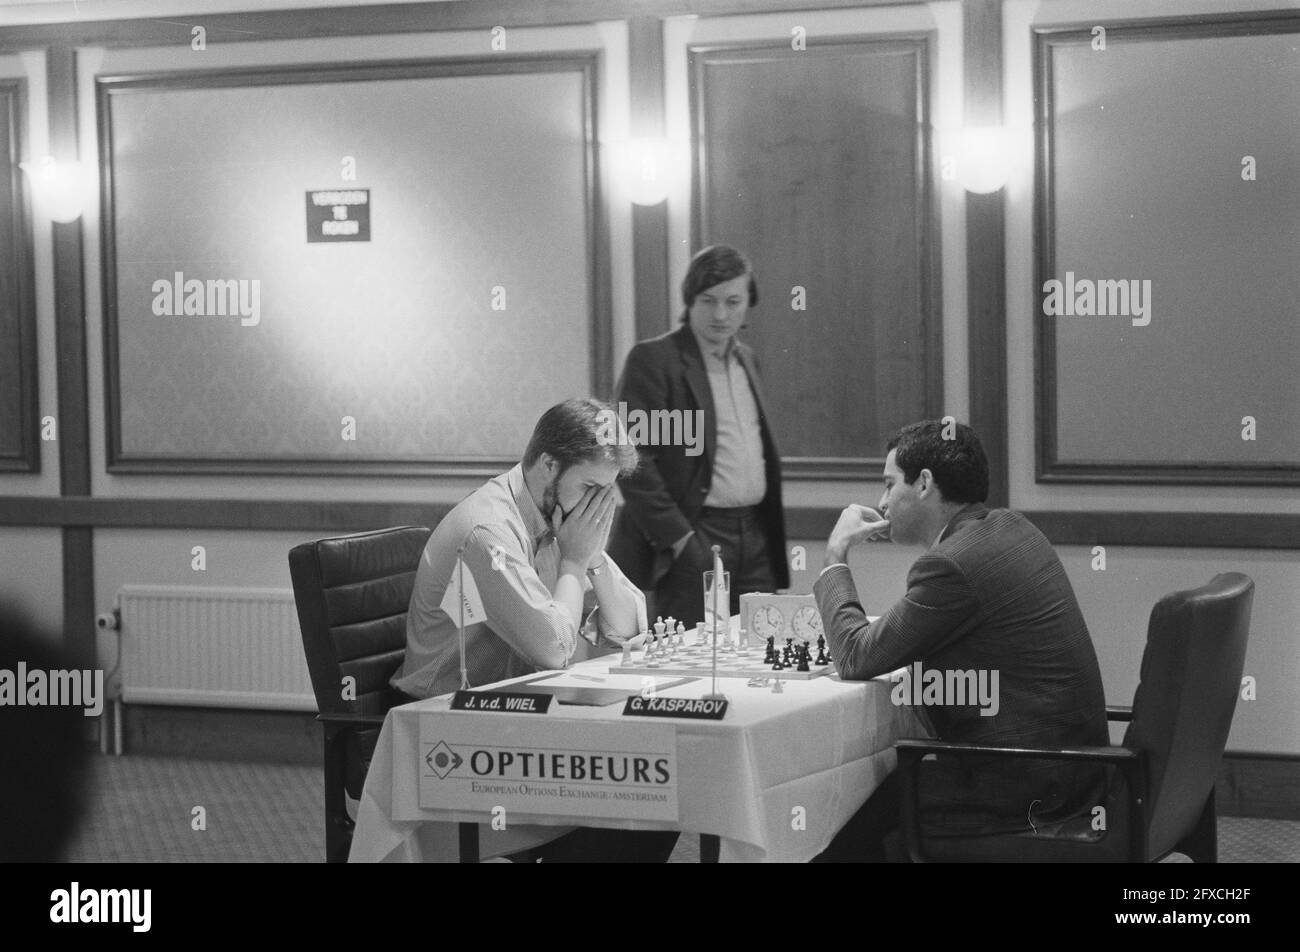 Option fair chess quadrilateral; Karpov walks past party Van der Wiel against Kasparov (r), May 17, 1988, Chess, Sports, The Netherlands, 20th century press agency photo, news to remember, documentary, historic photography 1945-1990, visual stories, human history of the Twentieth Century, capturing moments in time Stock Photo